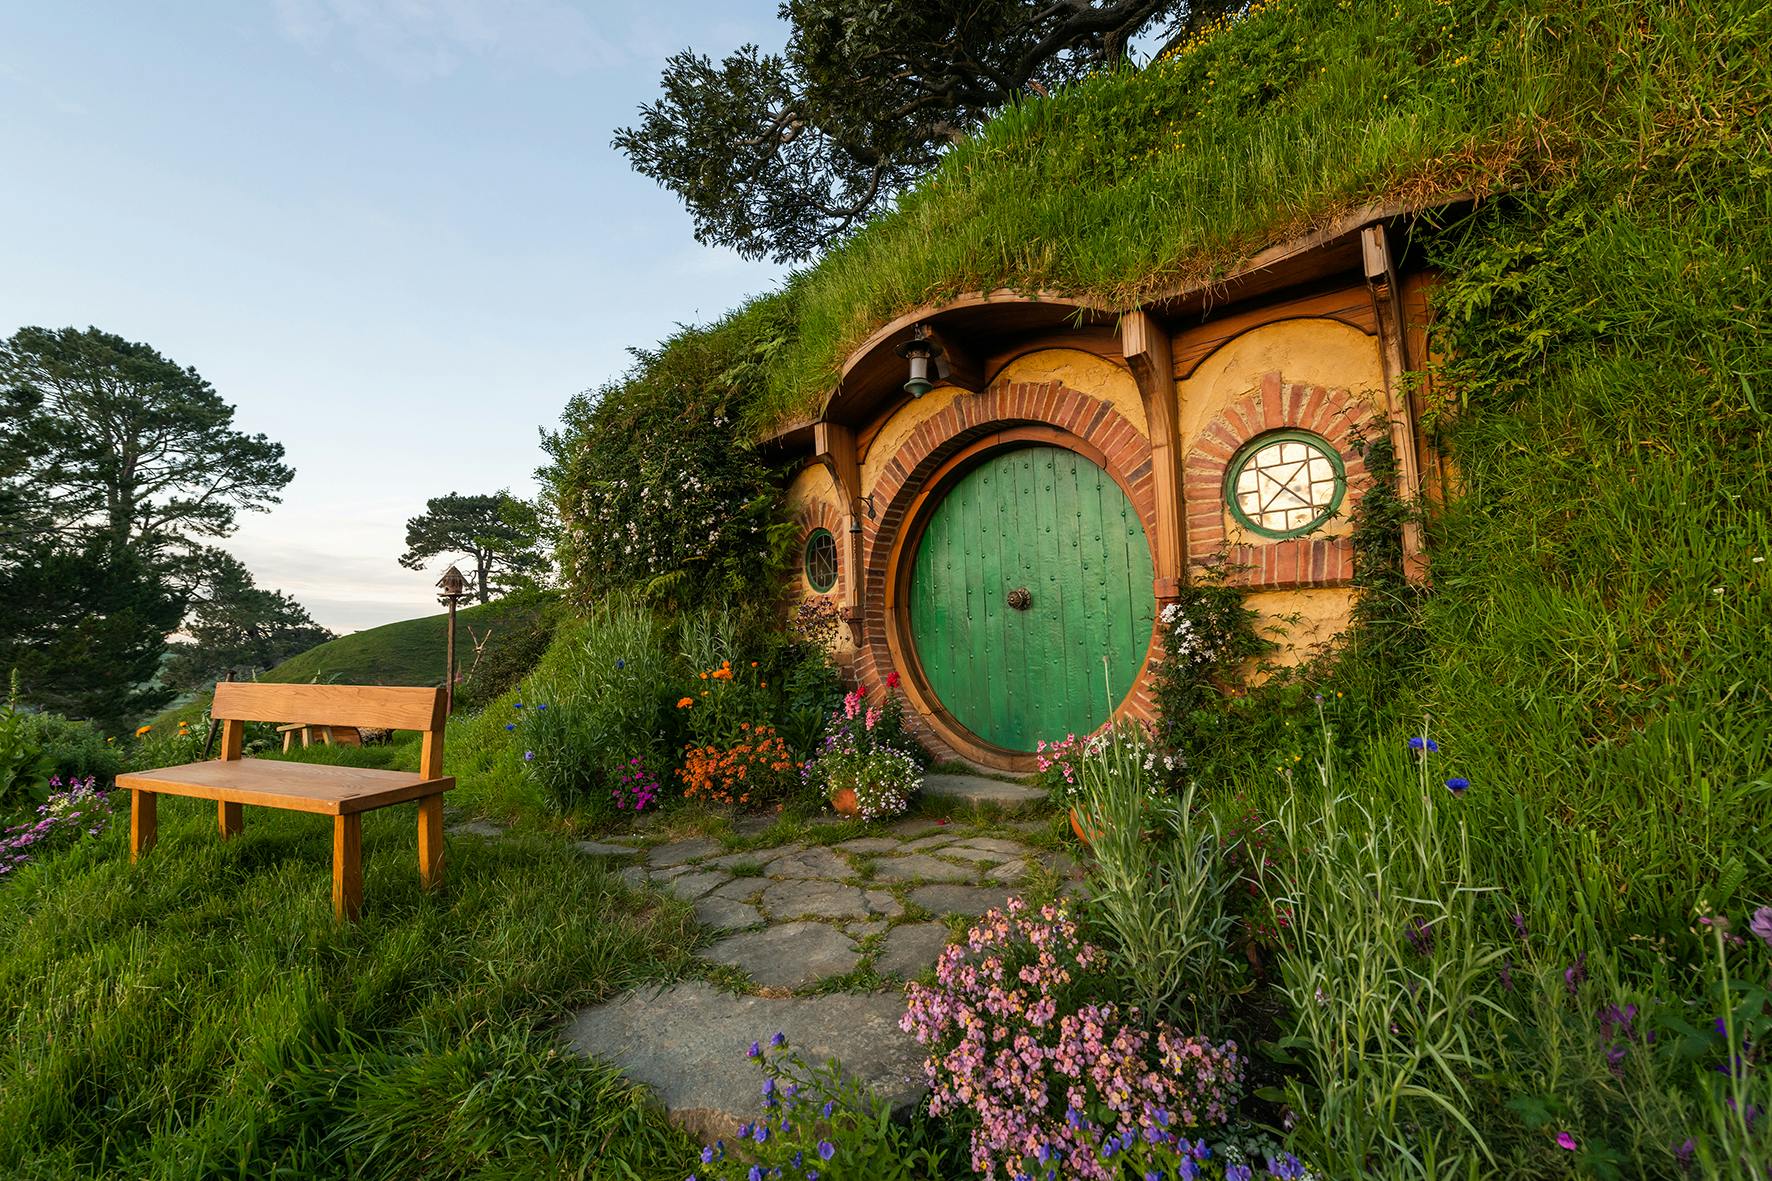 Middle earth experience - Hobbiton movie set and Glowworm cave tour